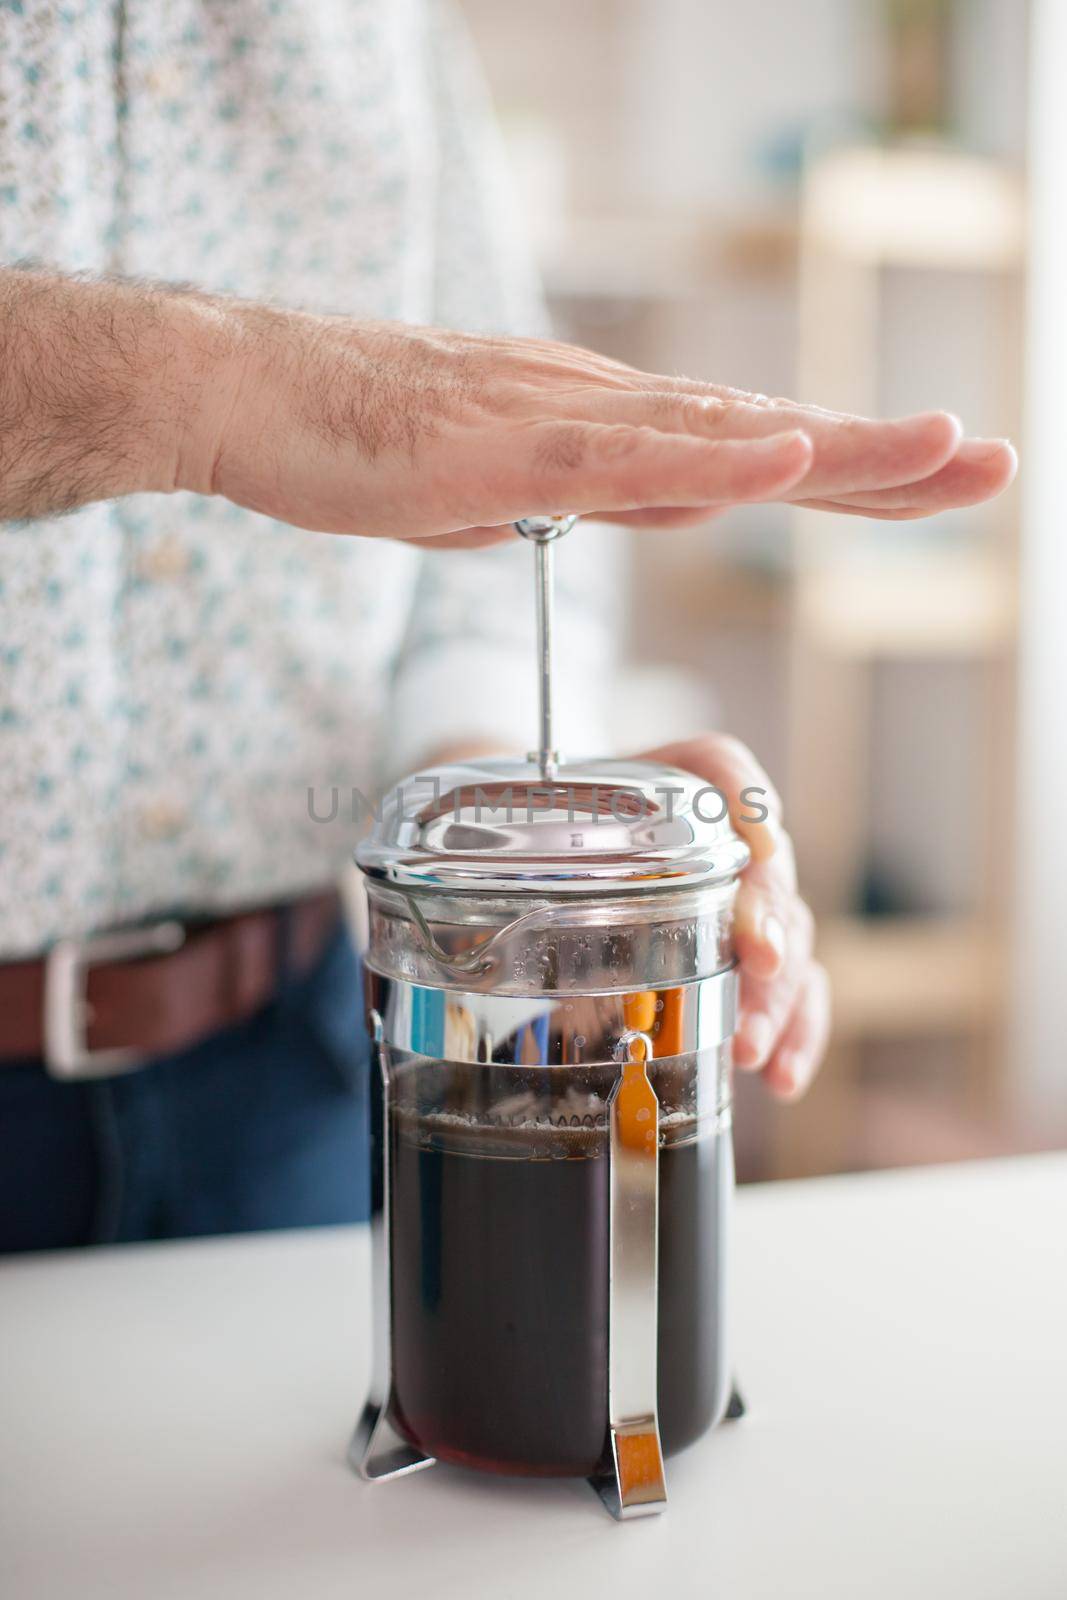 Making coffee using french press by DCStudio